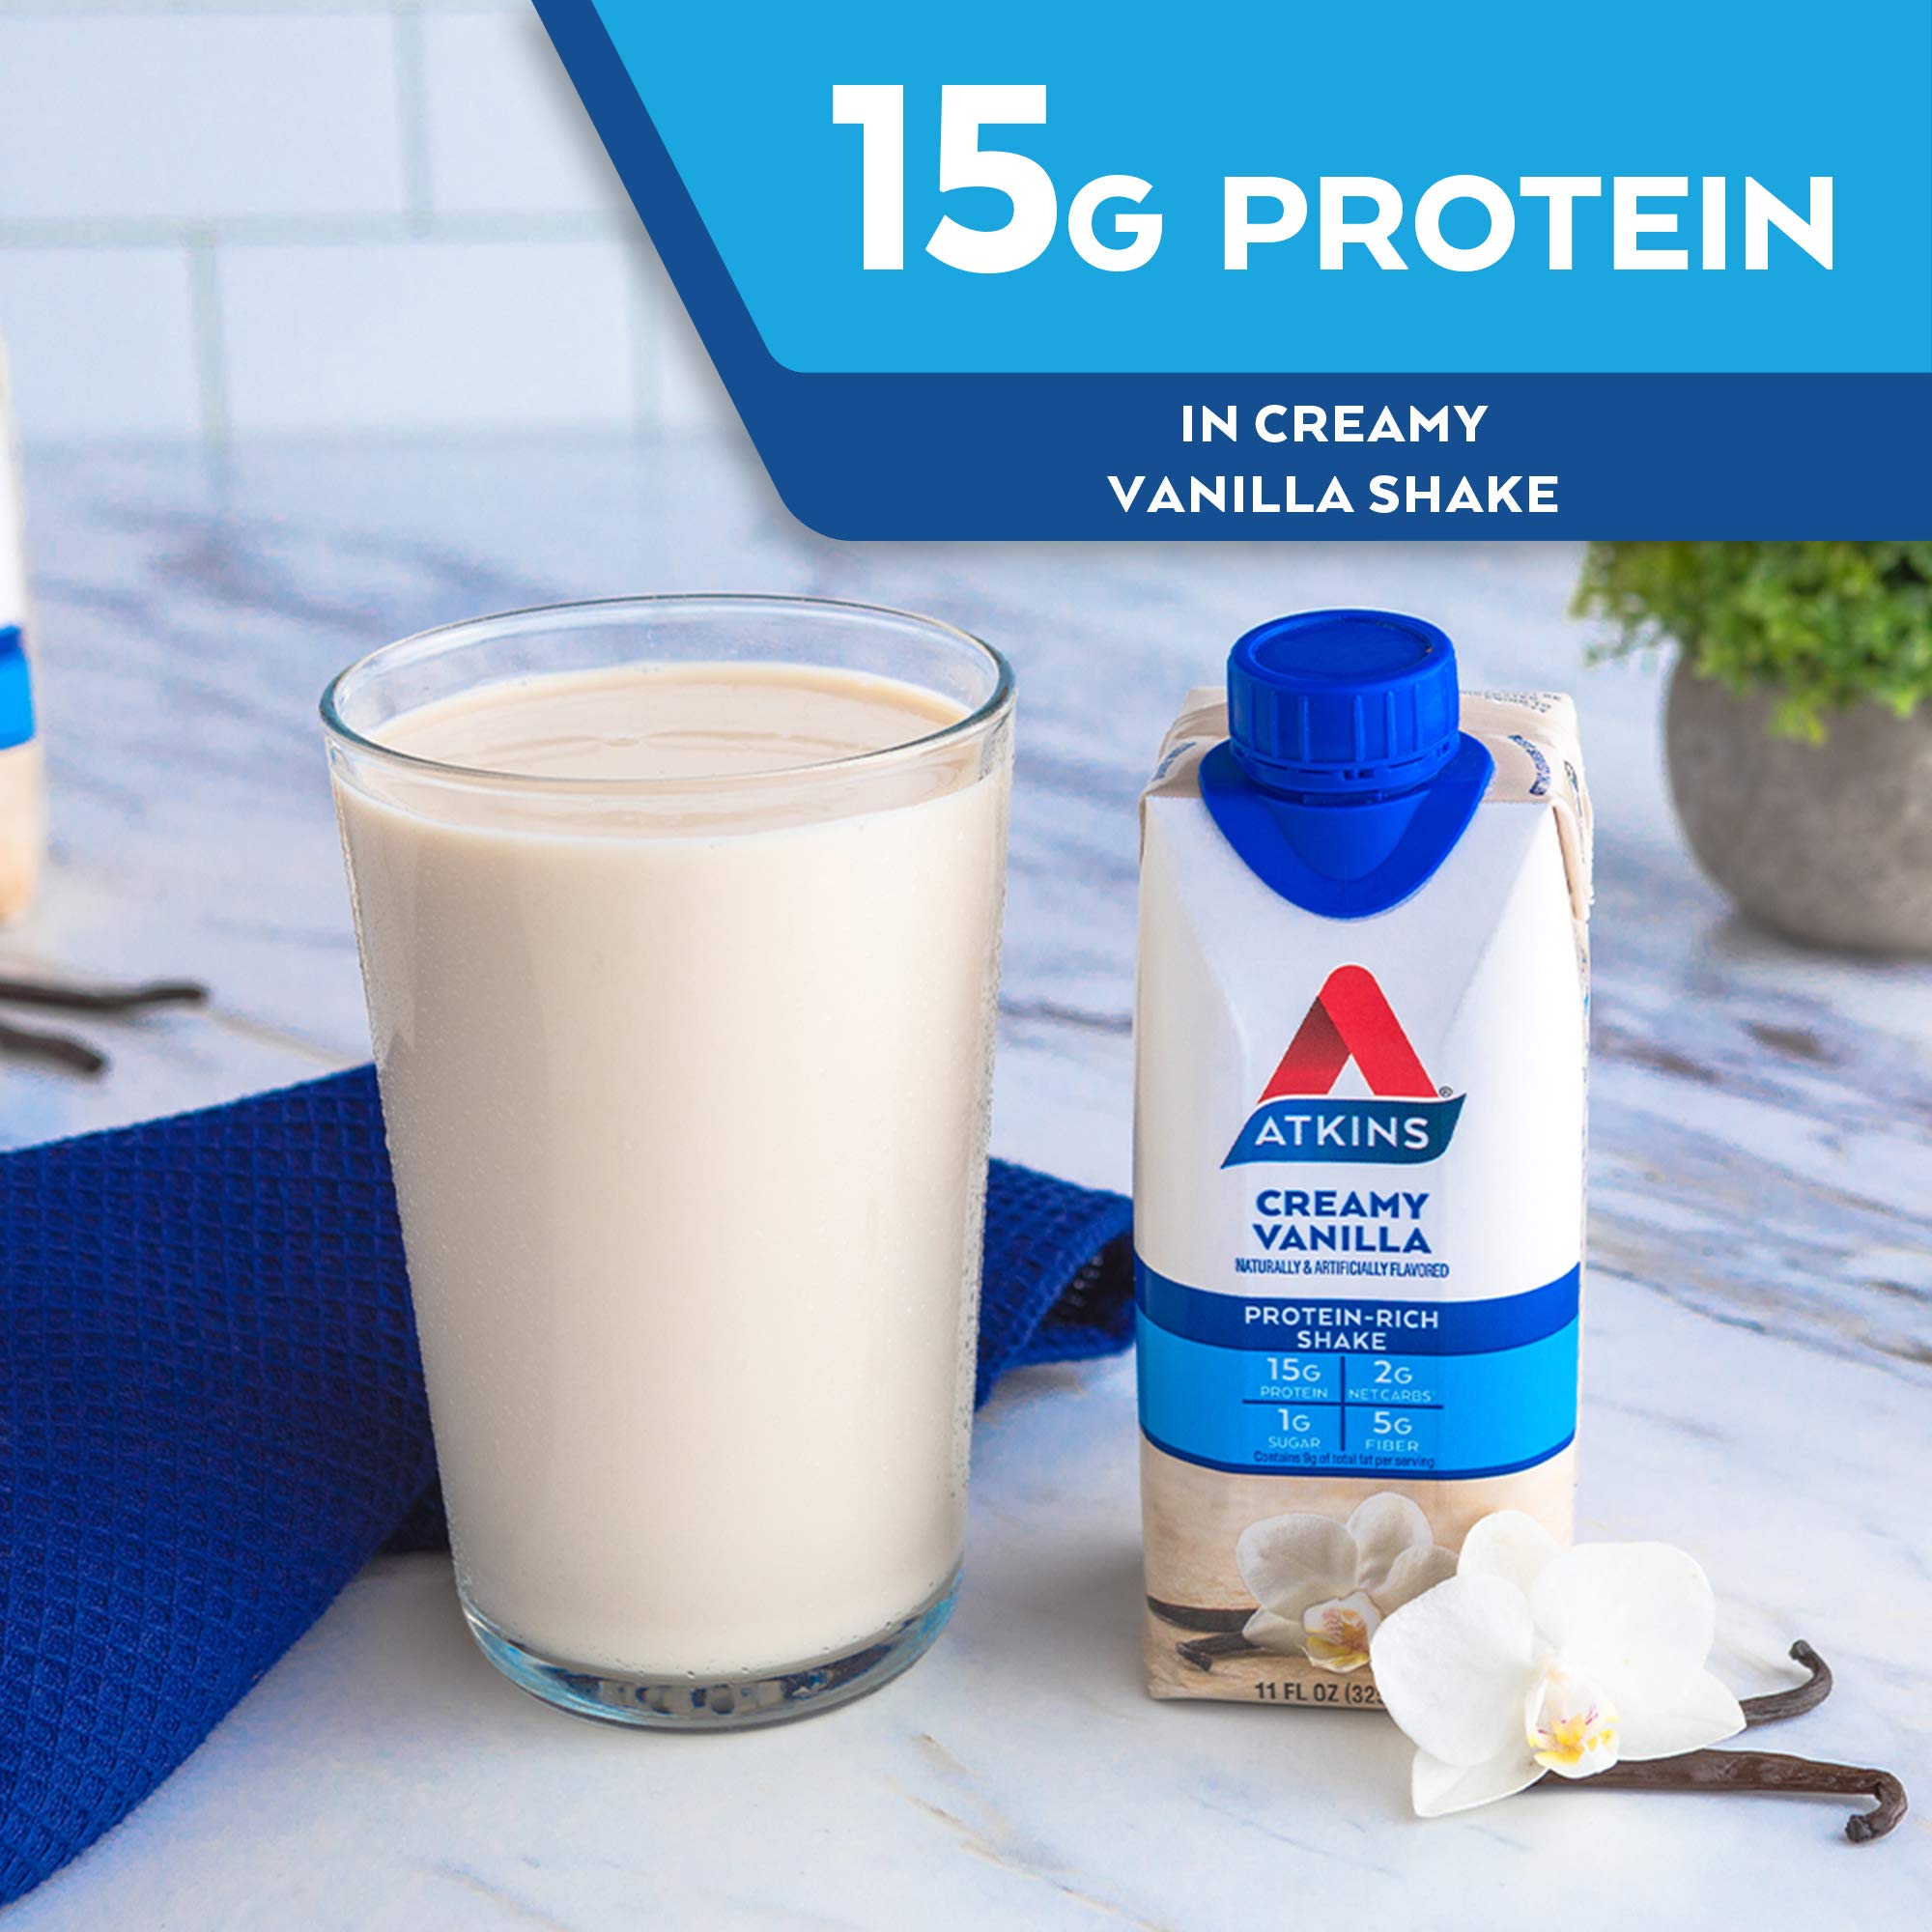 Atkins Creamy Vanilla Protein Shake, 15g Protein, Low Glycemic, 2g Net Carb, 1g Sugar, Keto Friendly, 12 Count